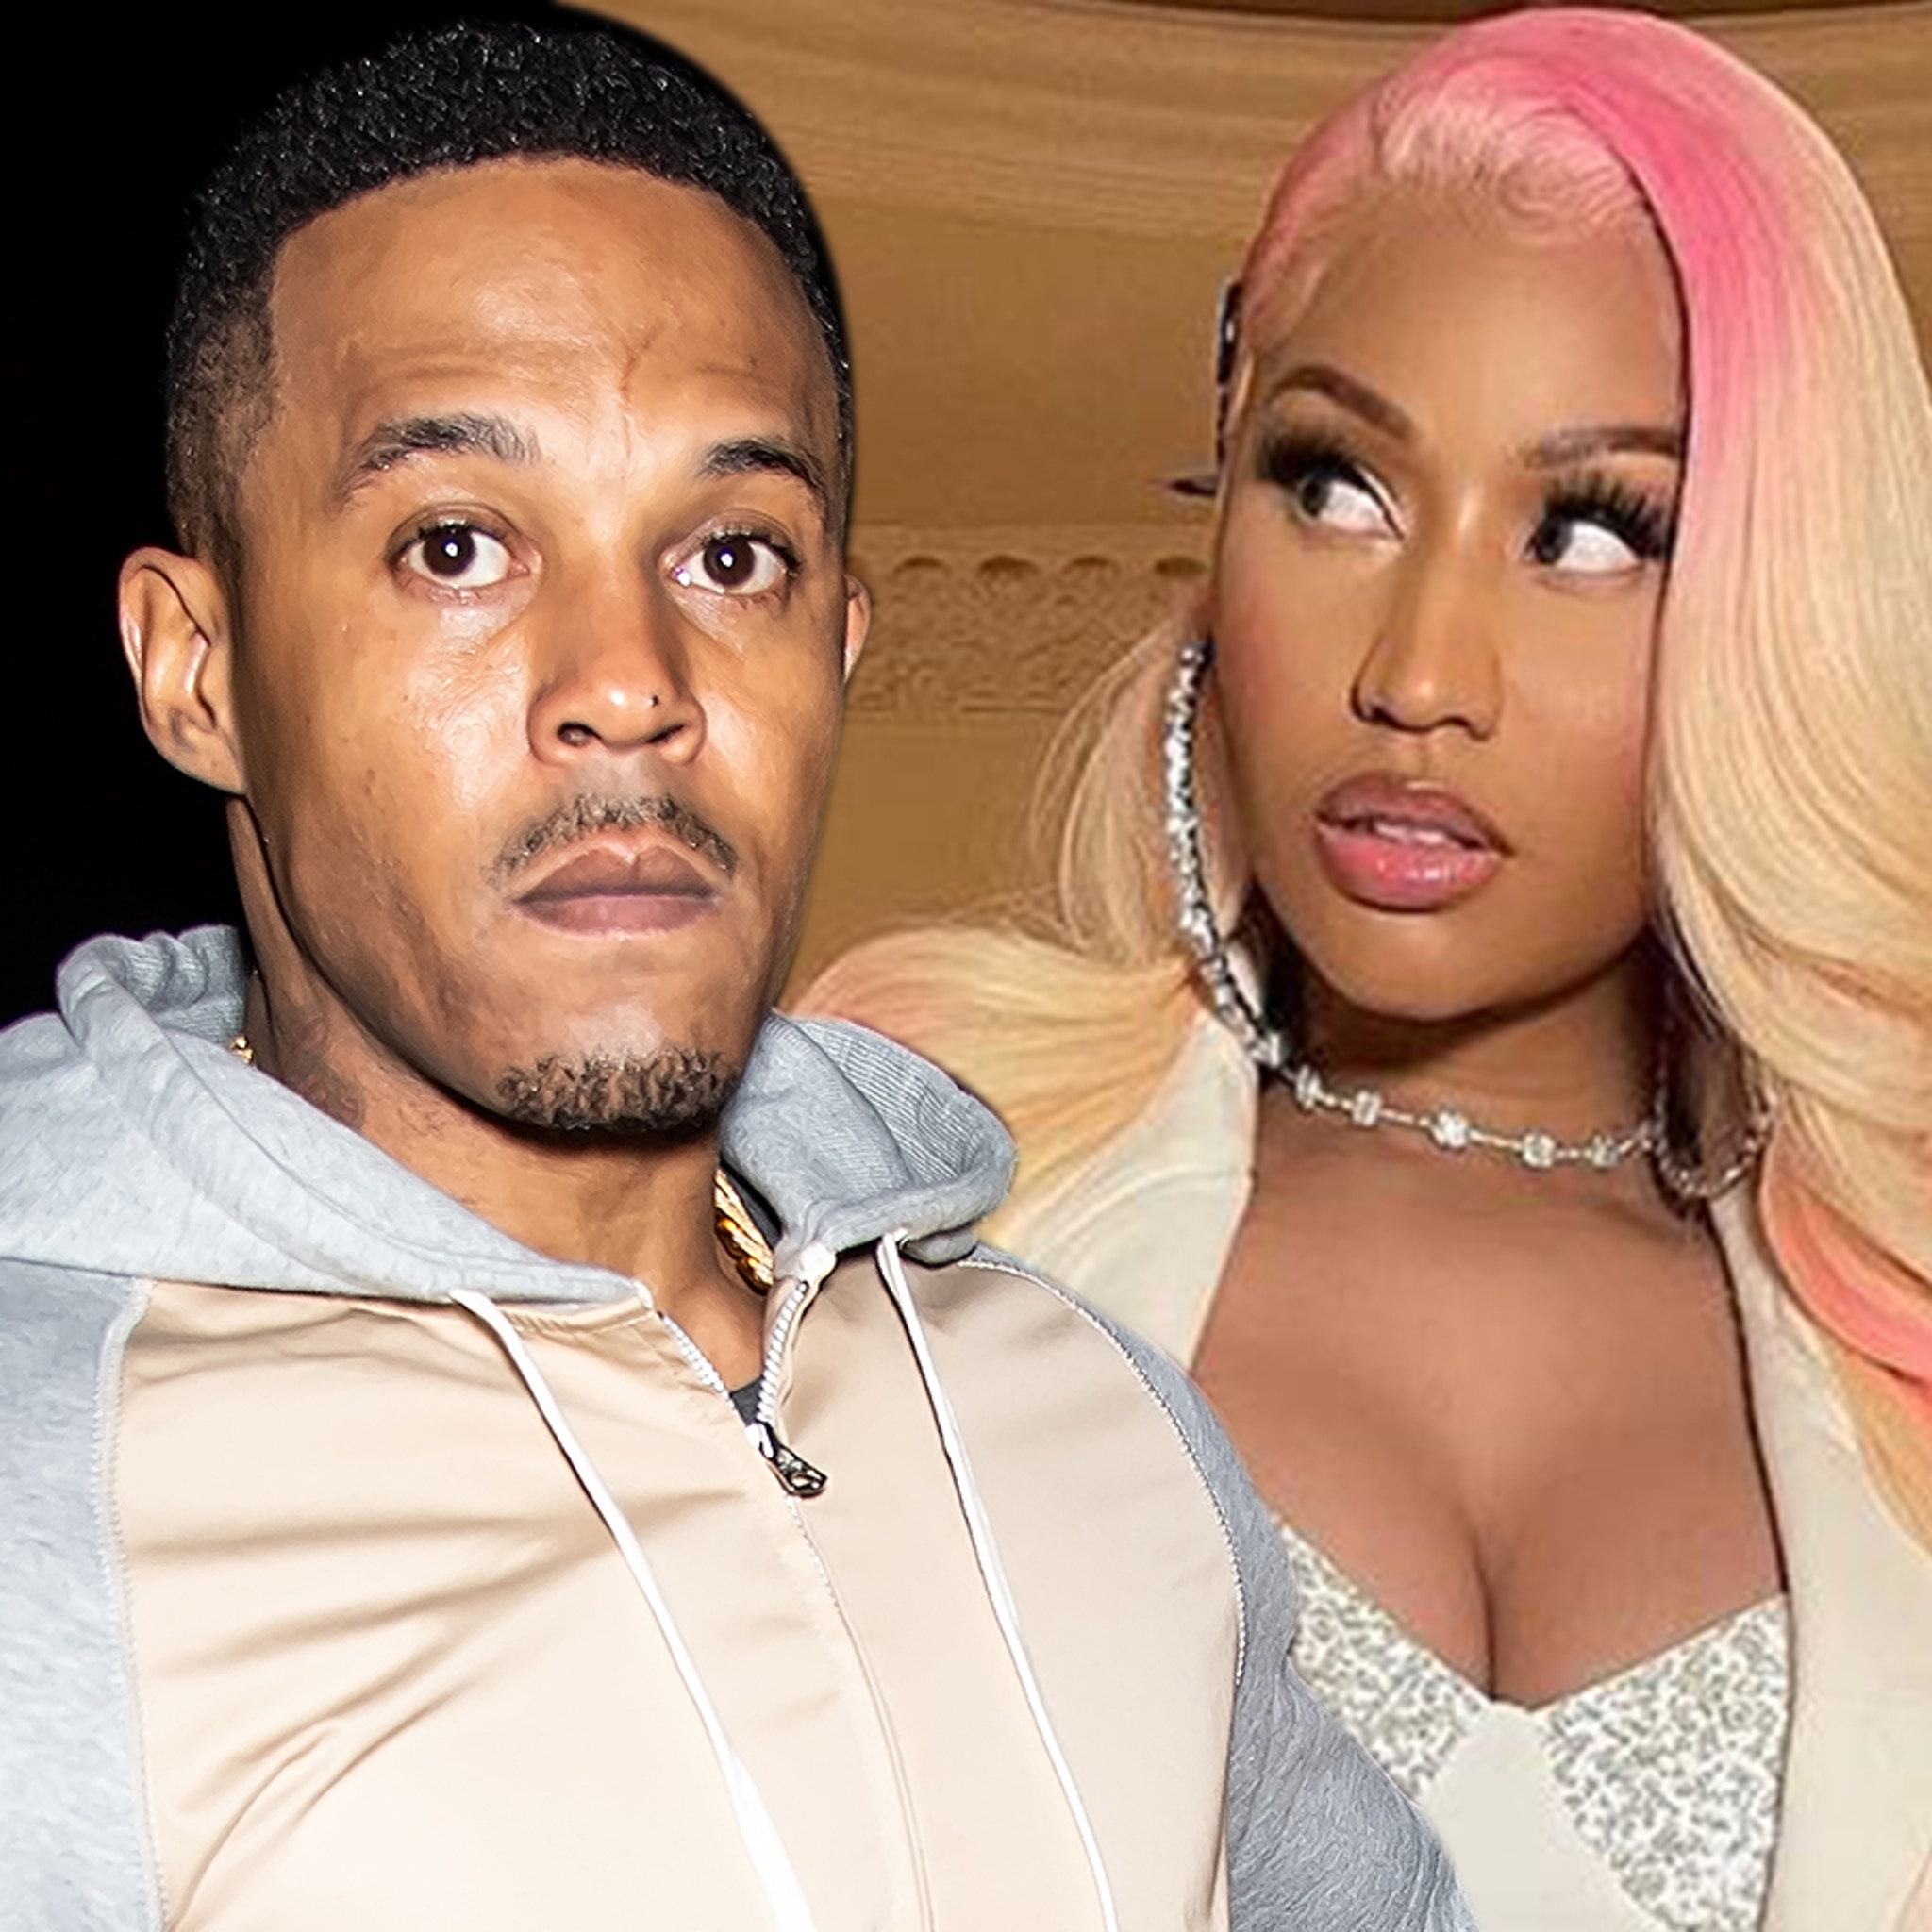 Nicki Minajs Husband Kenneth Petty Sentenced, 1 Year at Home but No Prison Time picture pic